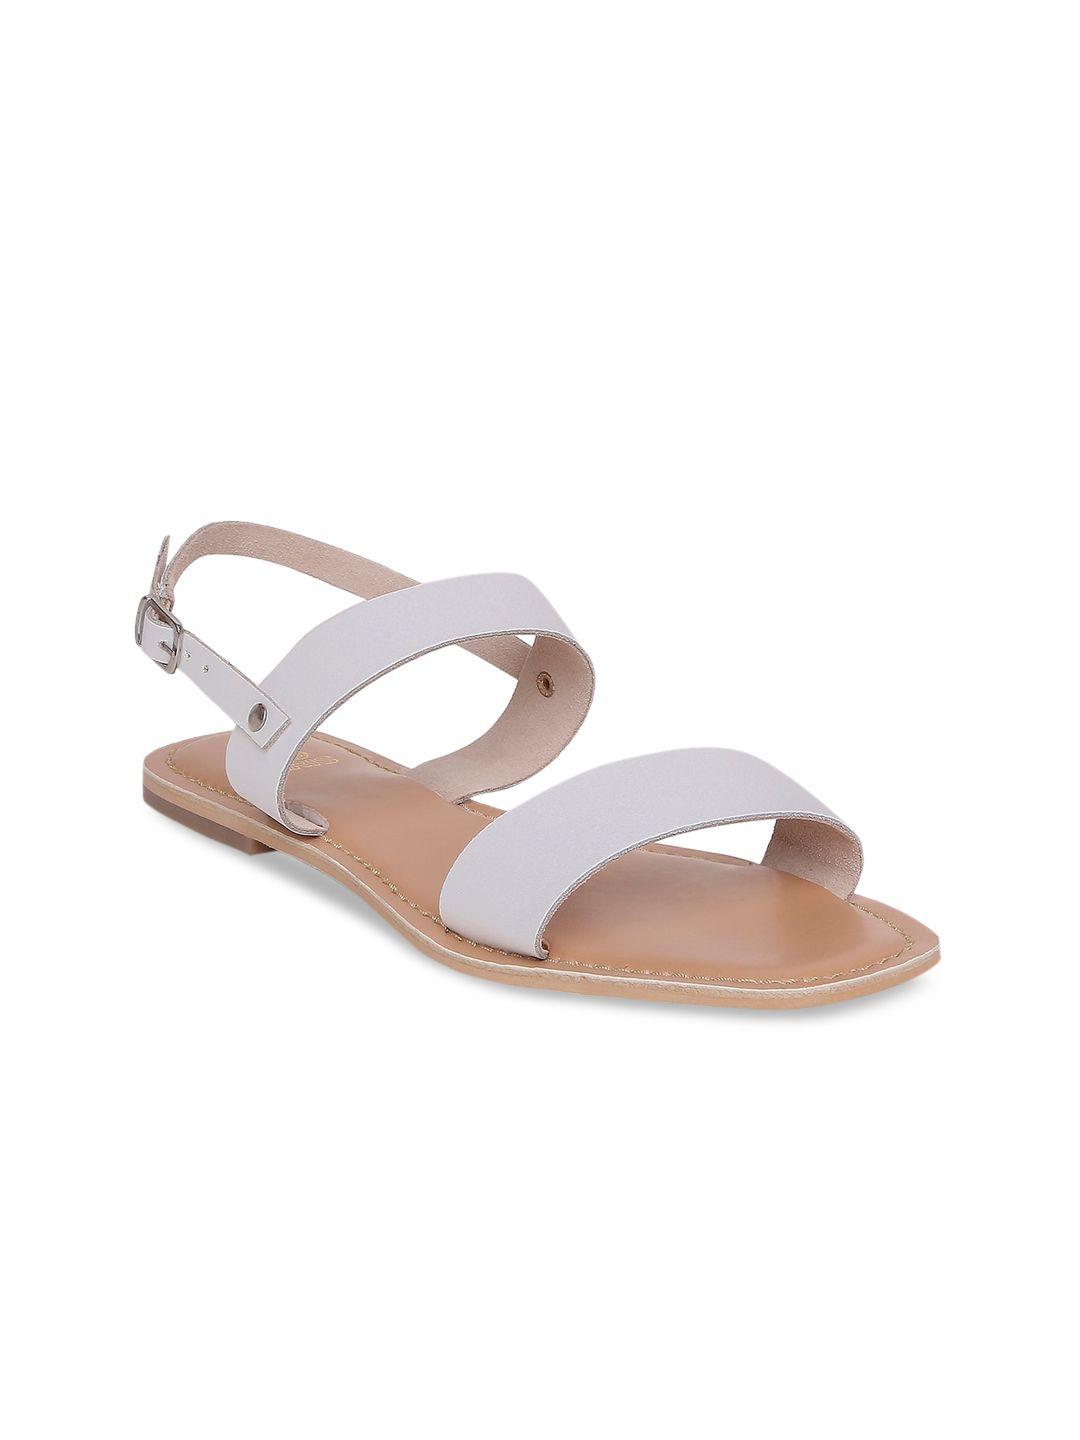 tao-paris-women-white-solid-leather-open-toe-flats-with-buckles